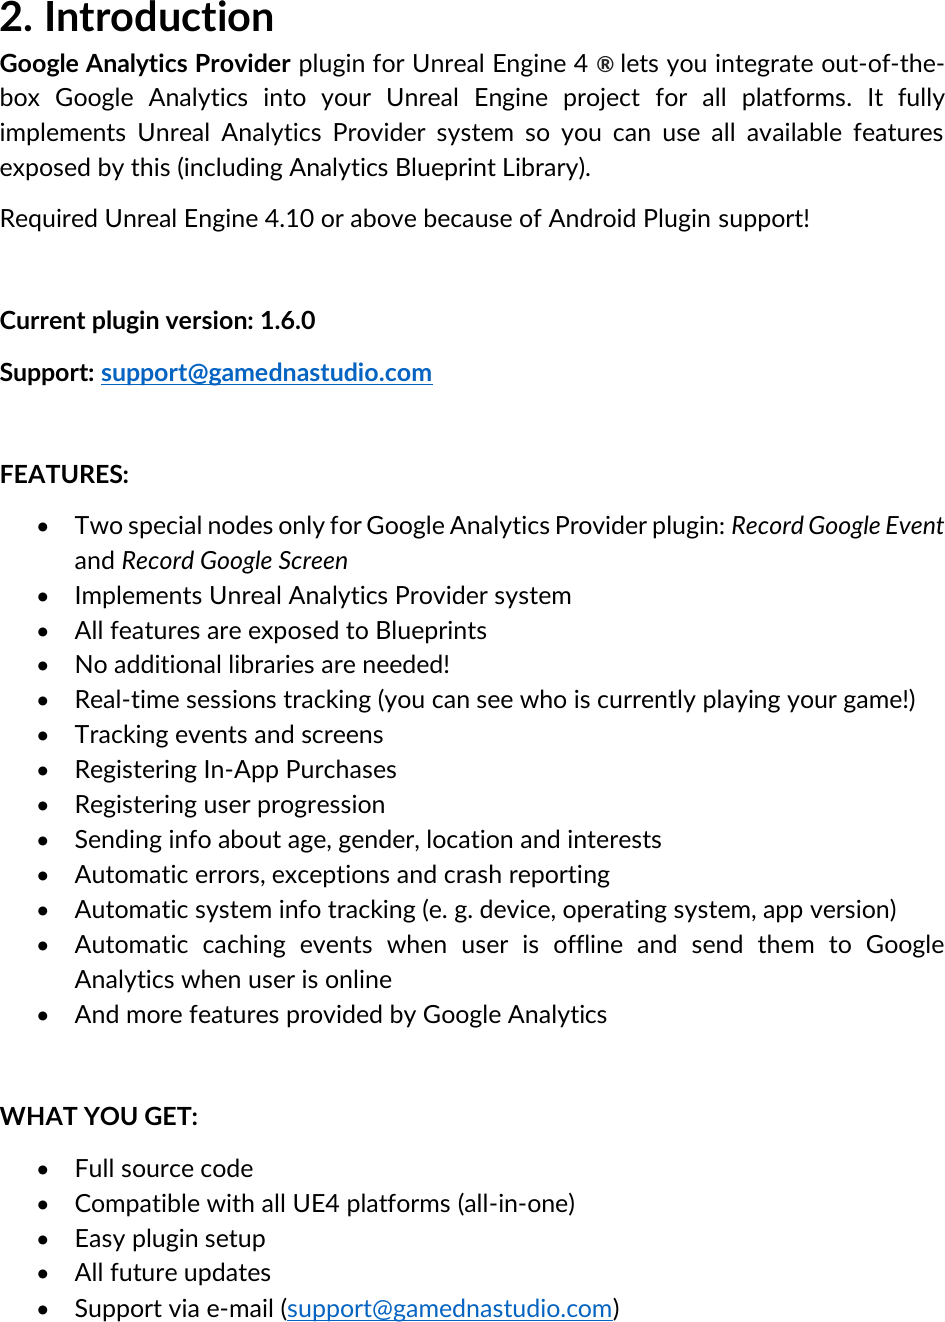 Page 4 of 9 - Google Analytics User Guide